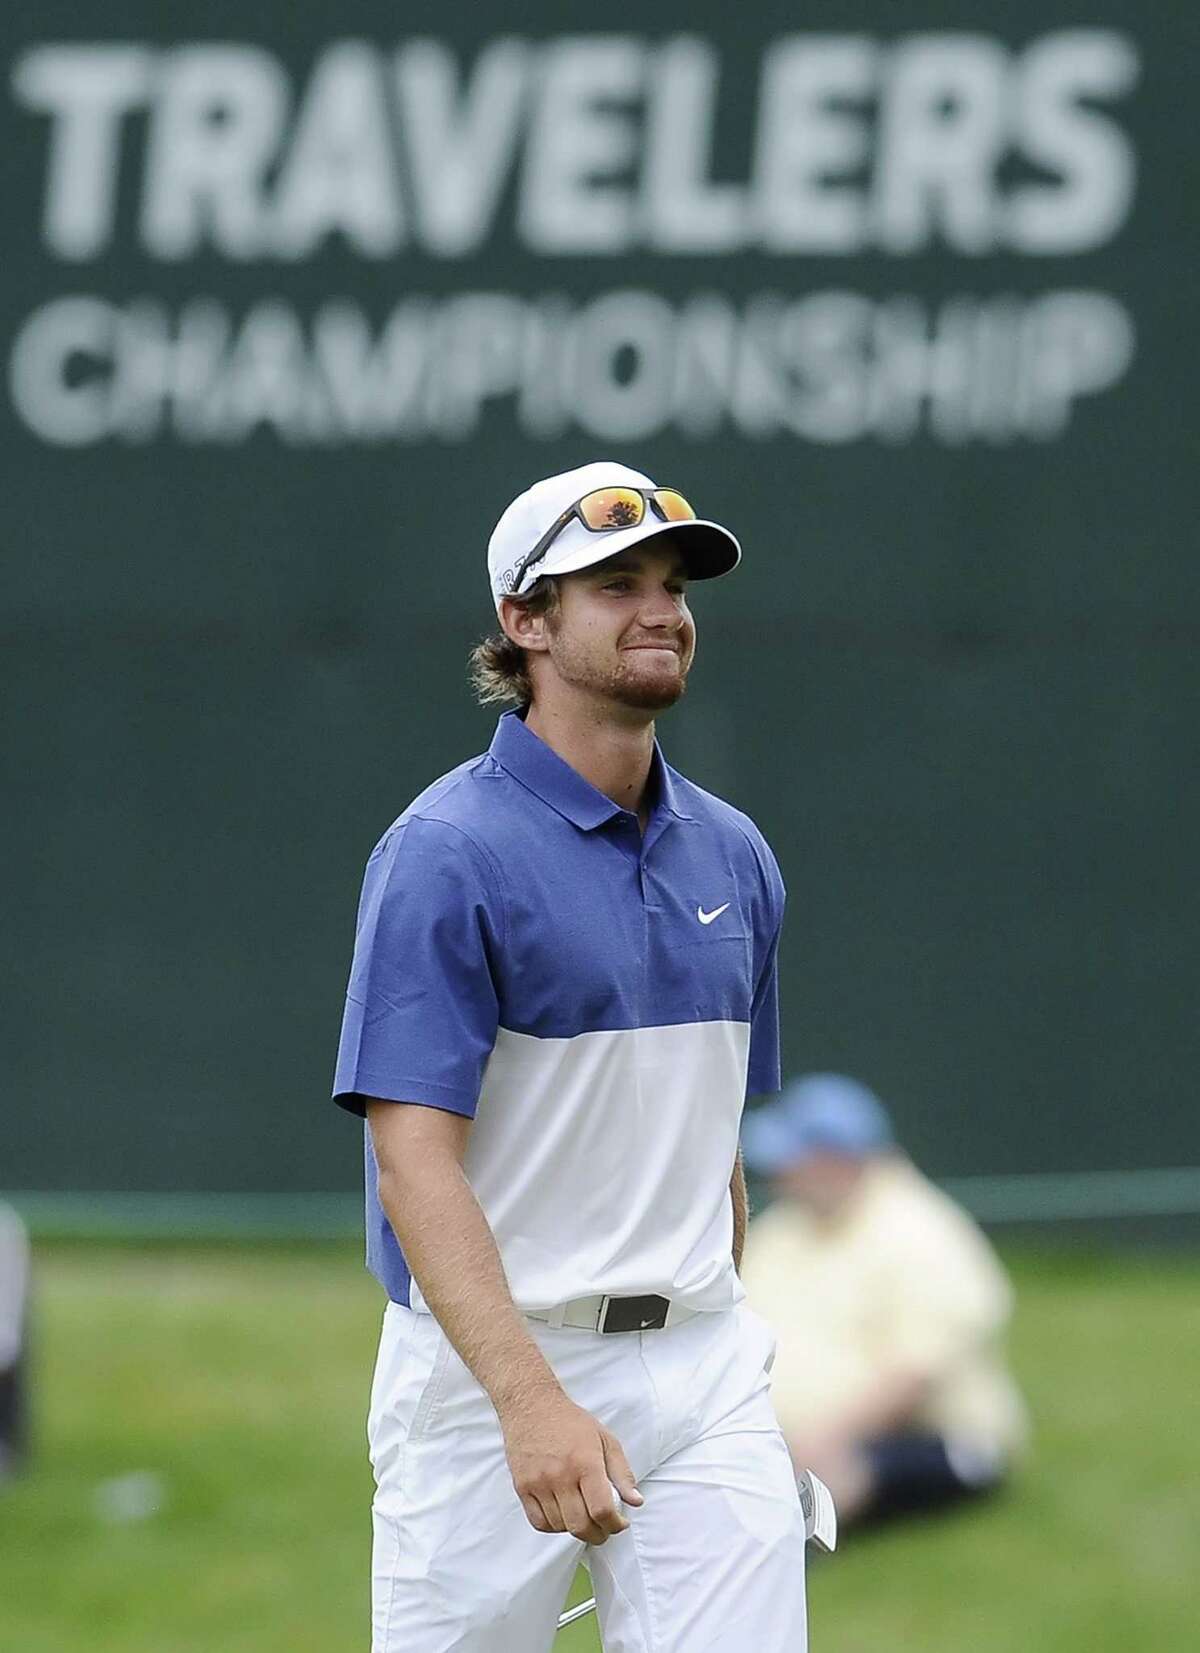 Patrick Rodgers reacts to a birdie putt on the 17th hole during the third round of the Travelers Championship on Saturday in Cromwell.